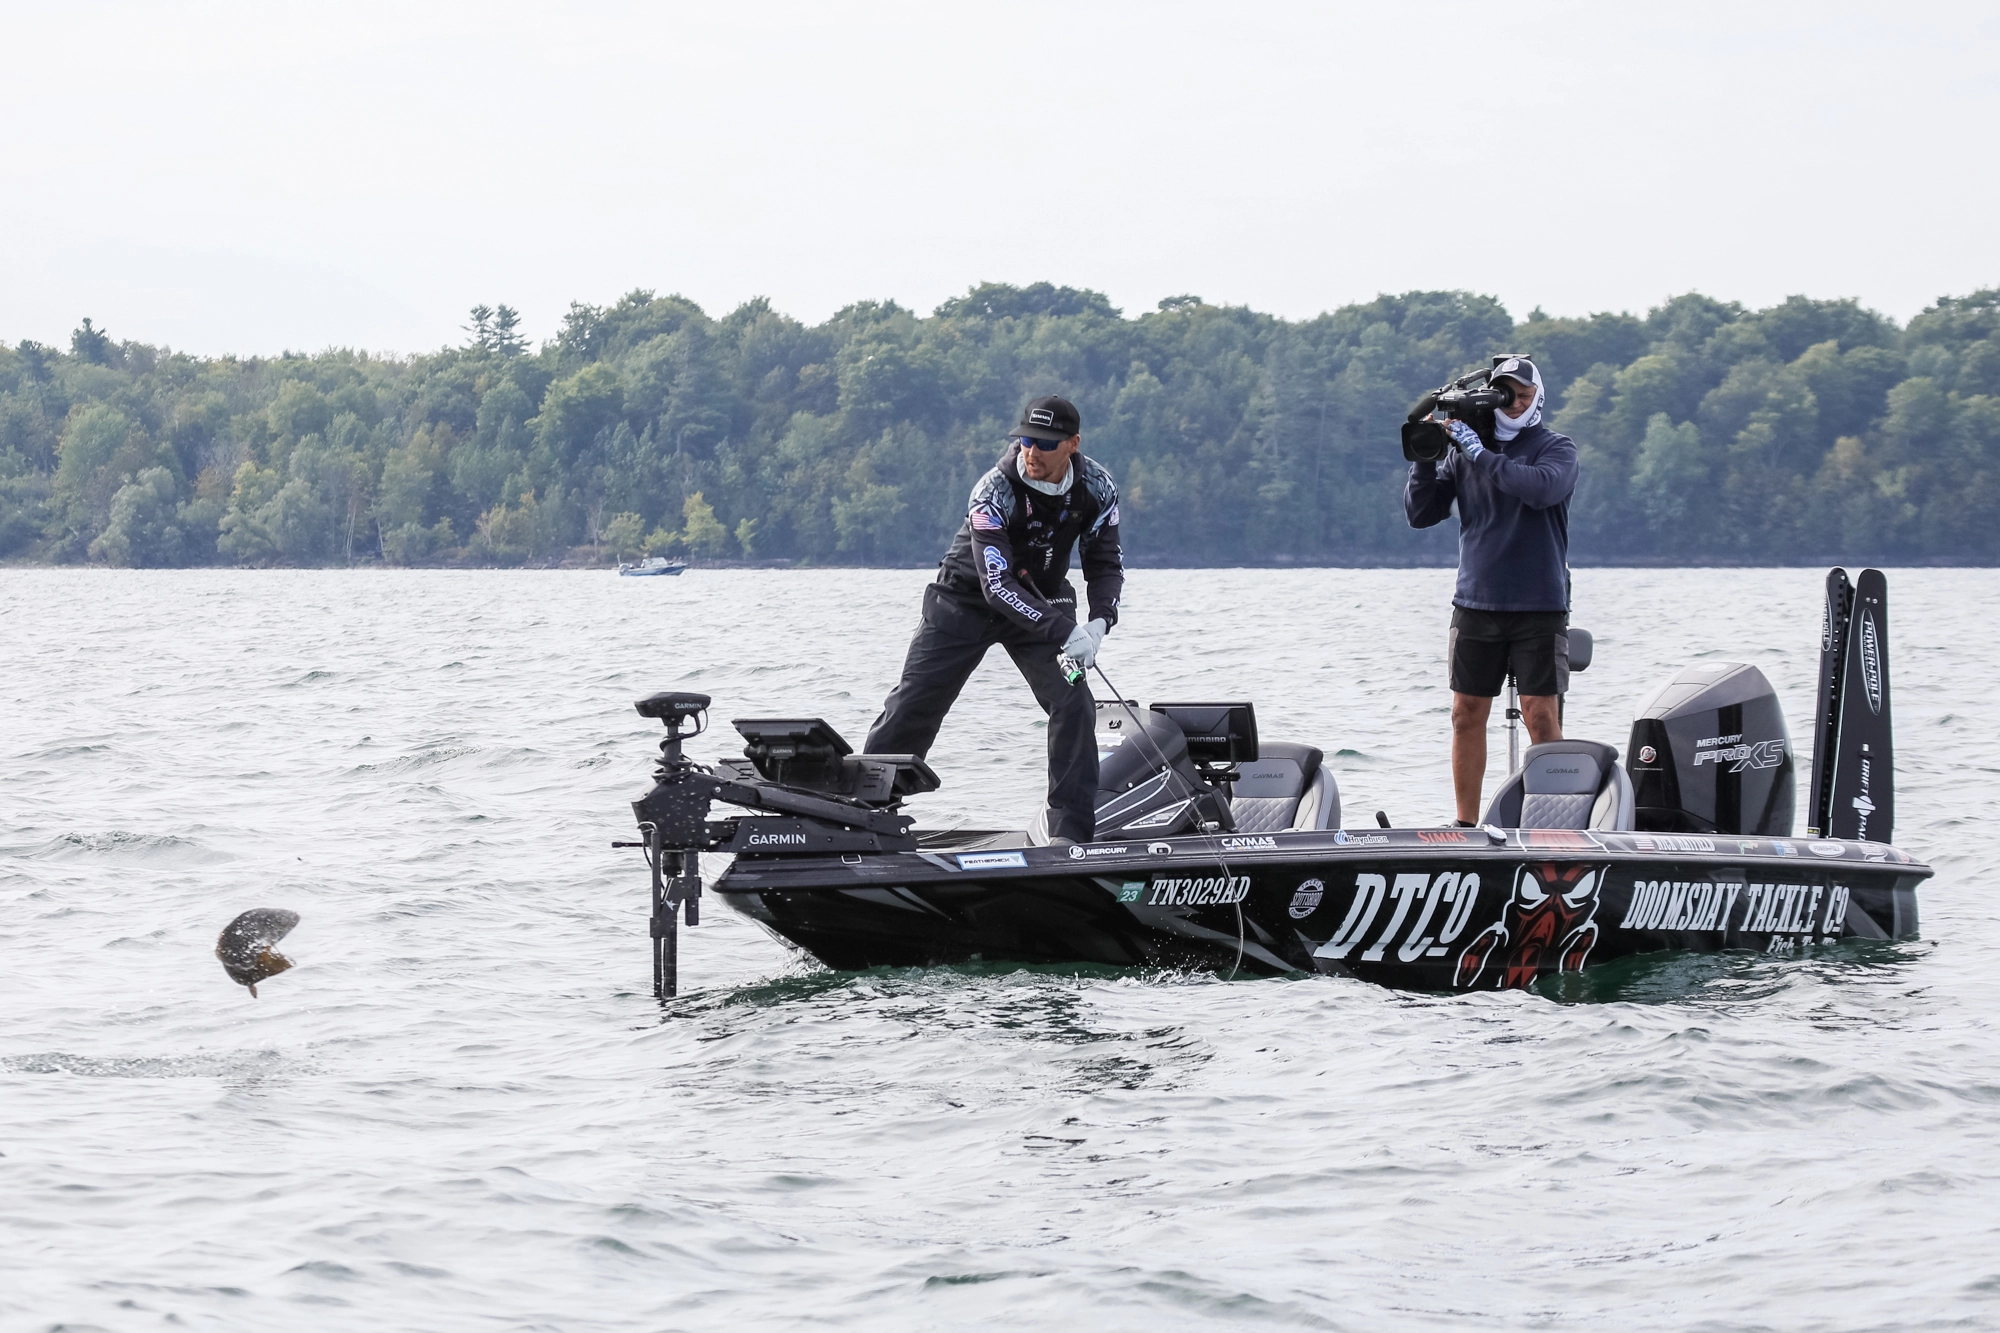 Kurt Mitchell Wins Knockout Round at MLF Tackle Warehouse Pro Circuit TITLE  Presented by Mercury on the St. Lawrence River